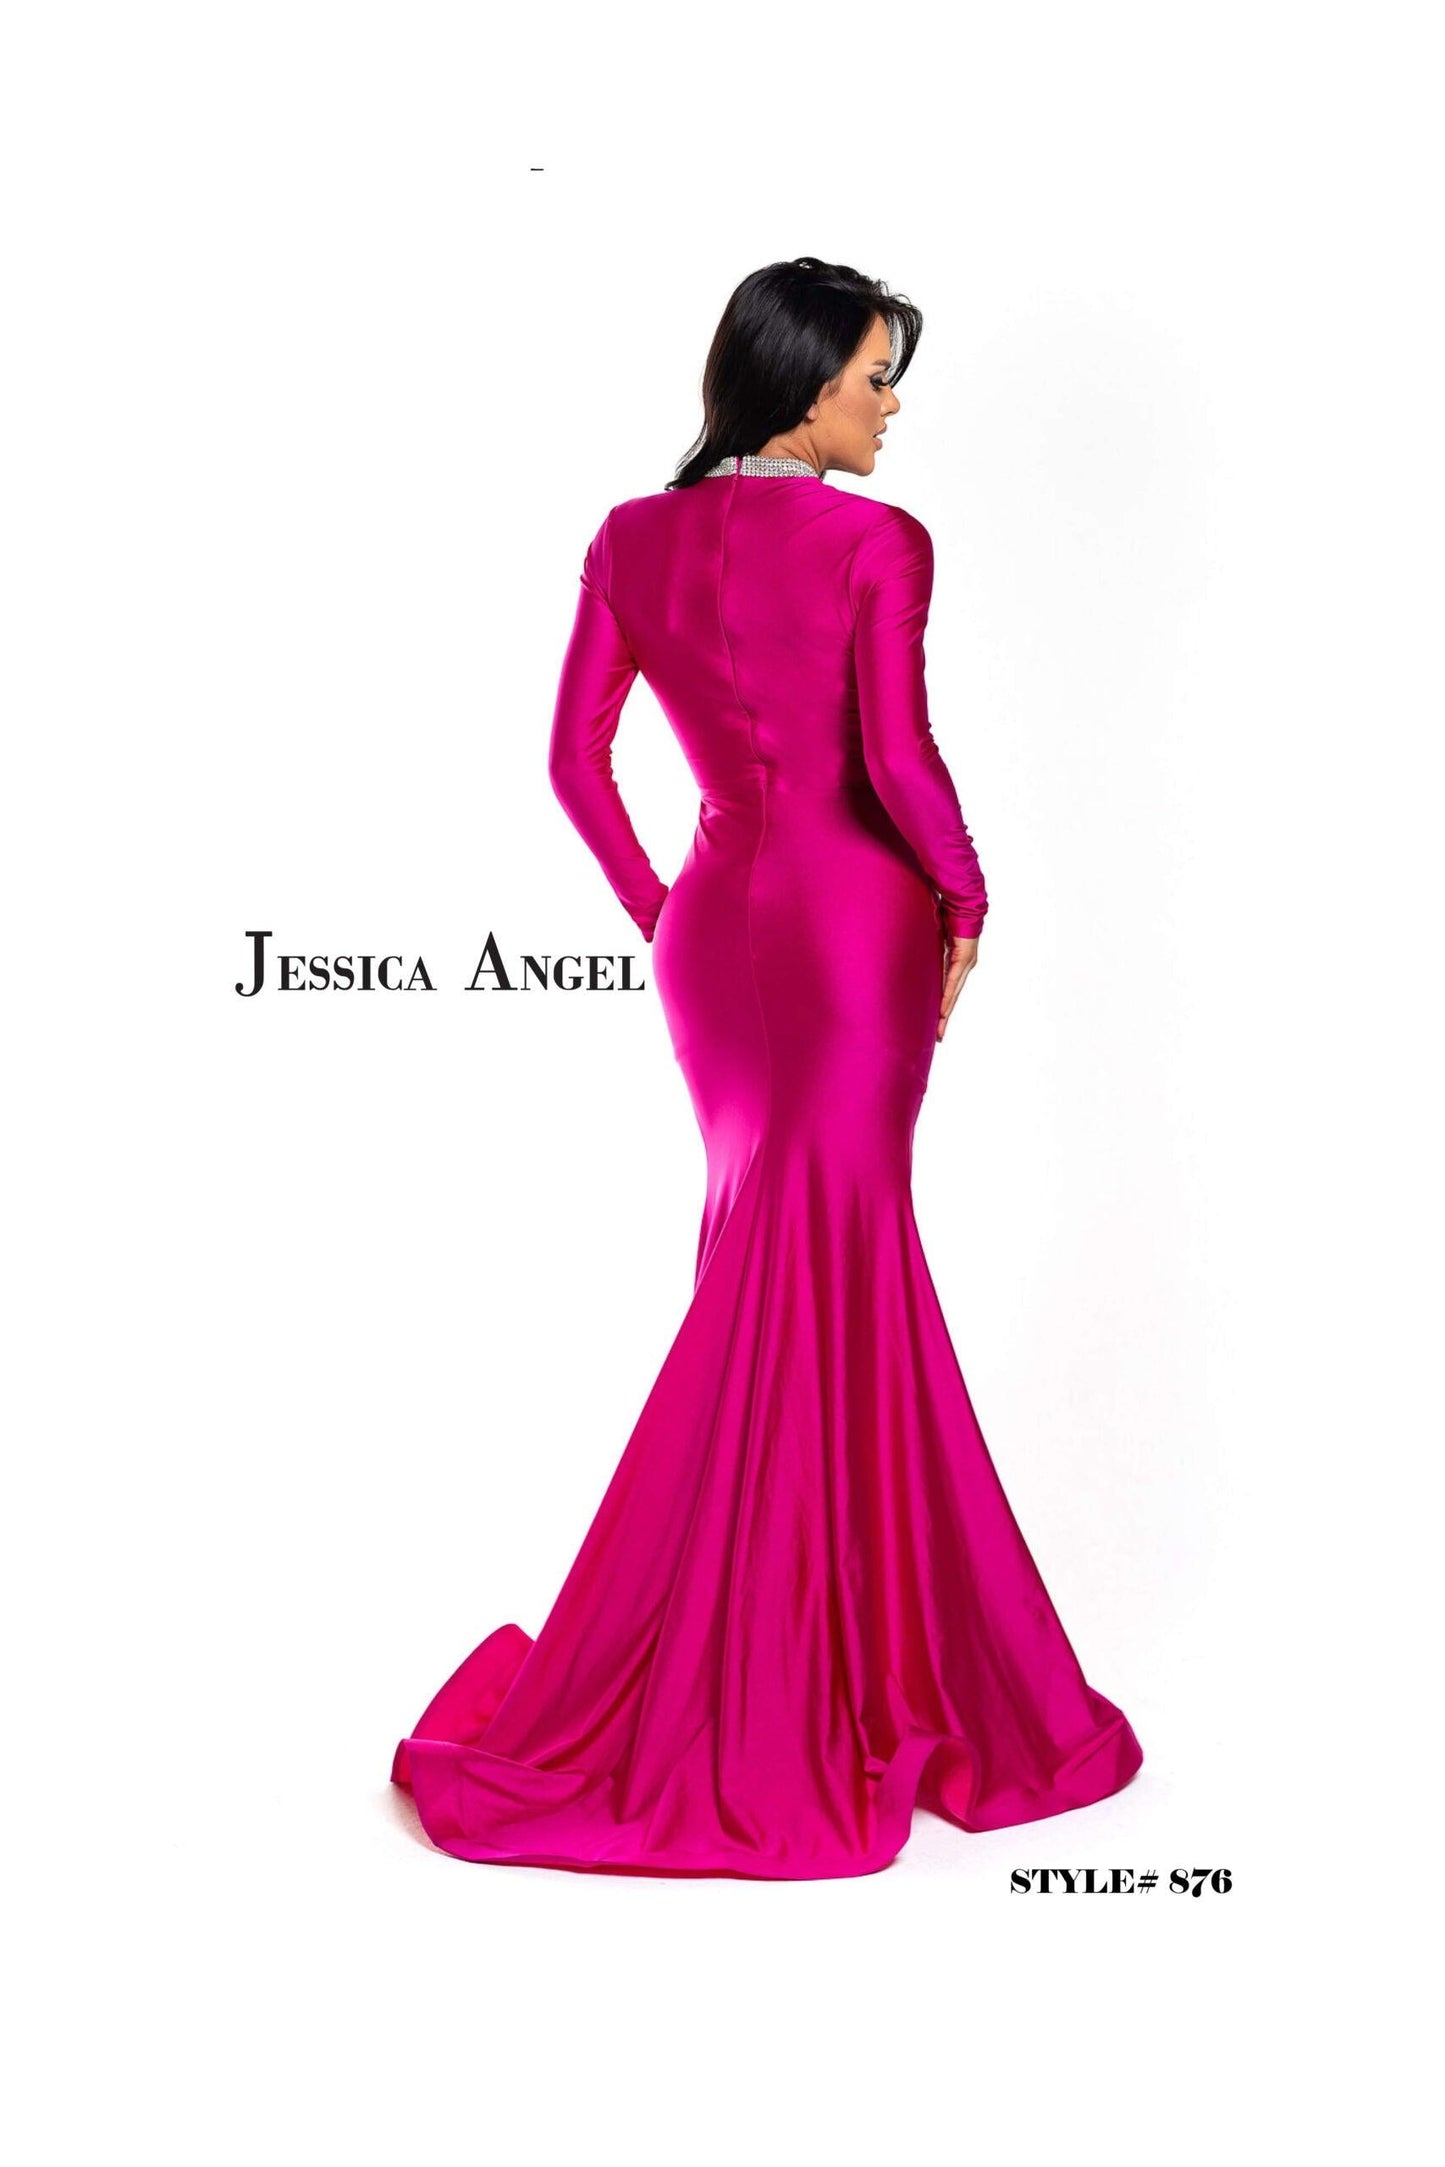 Jessica Angel High Low Fitted Formal Dress 876 - The Dress Outlet